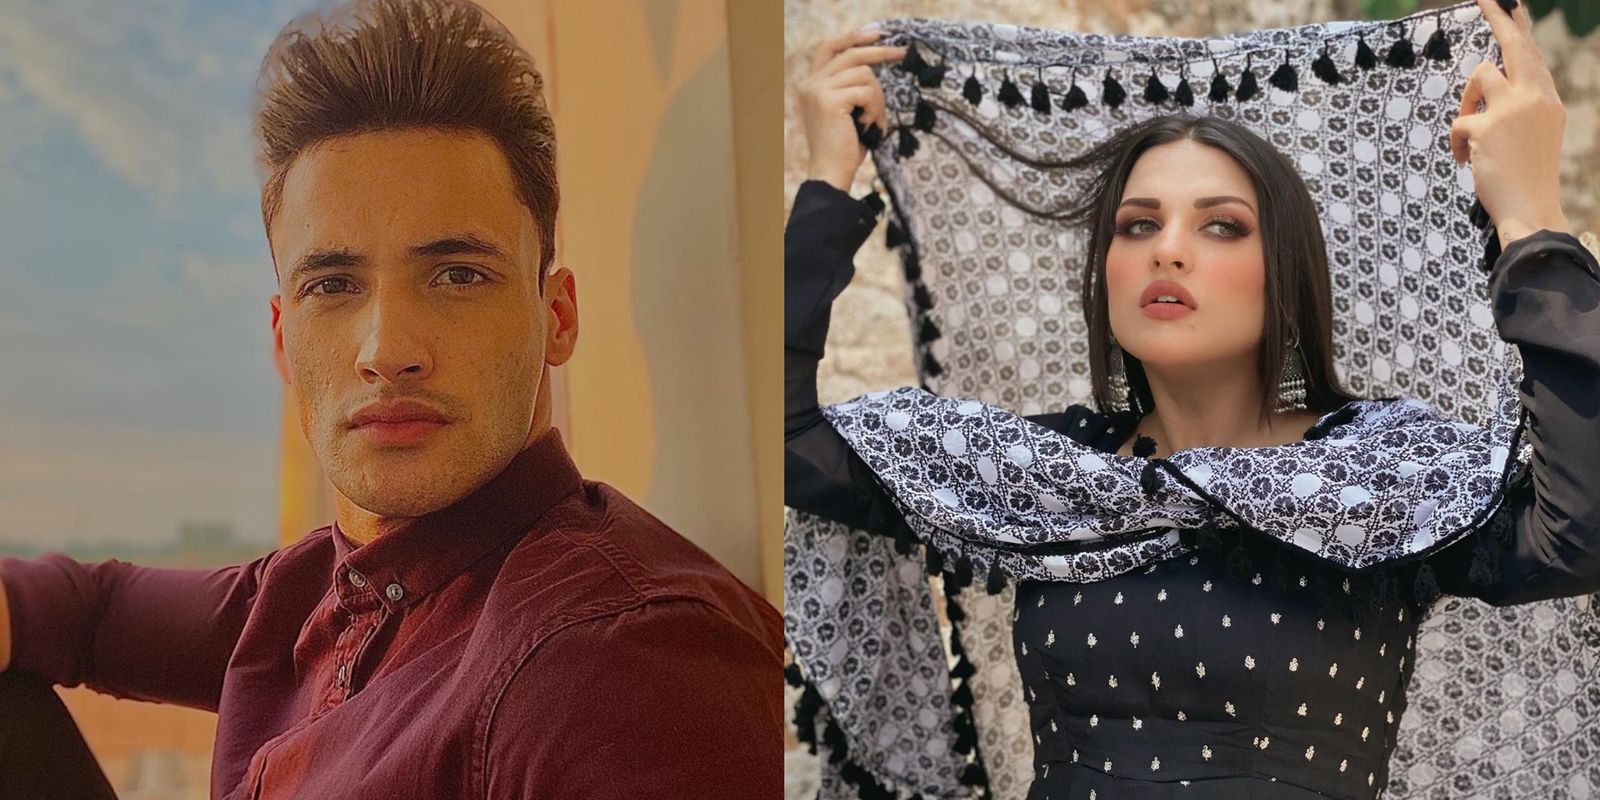 Asim Riaz And Himanshi Khurana Share Gorgeous Clicks Along With Motivational Messages For Fans